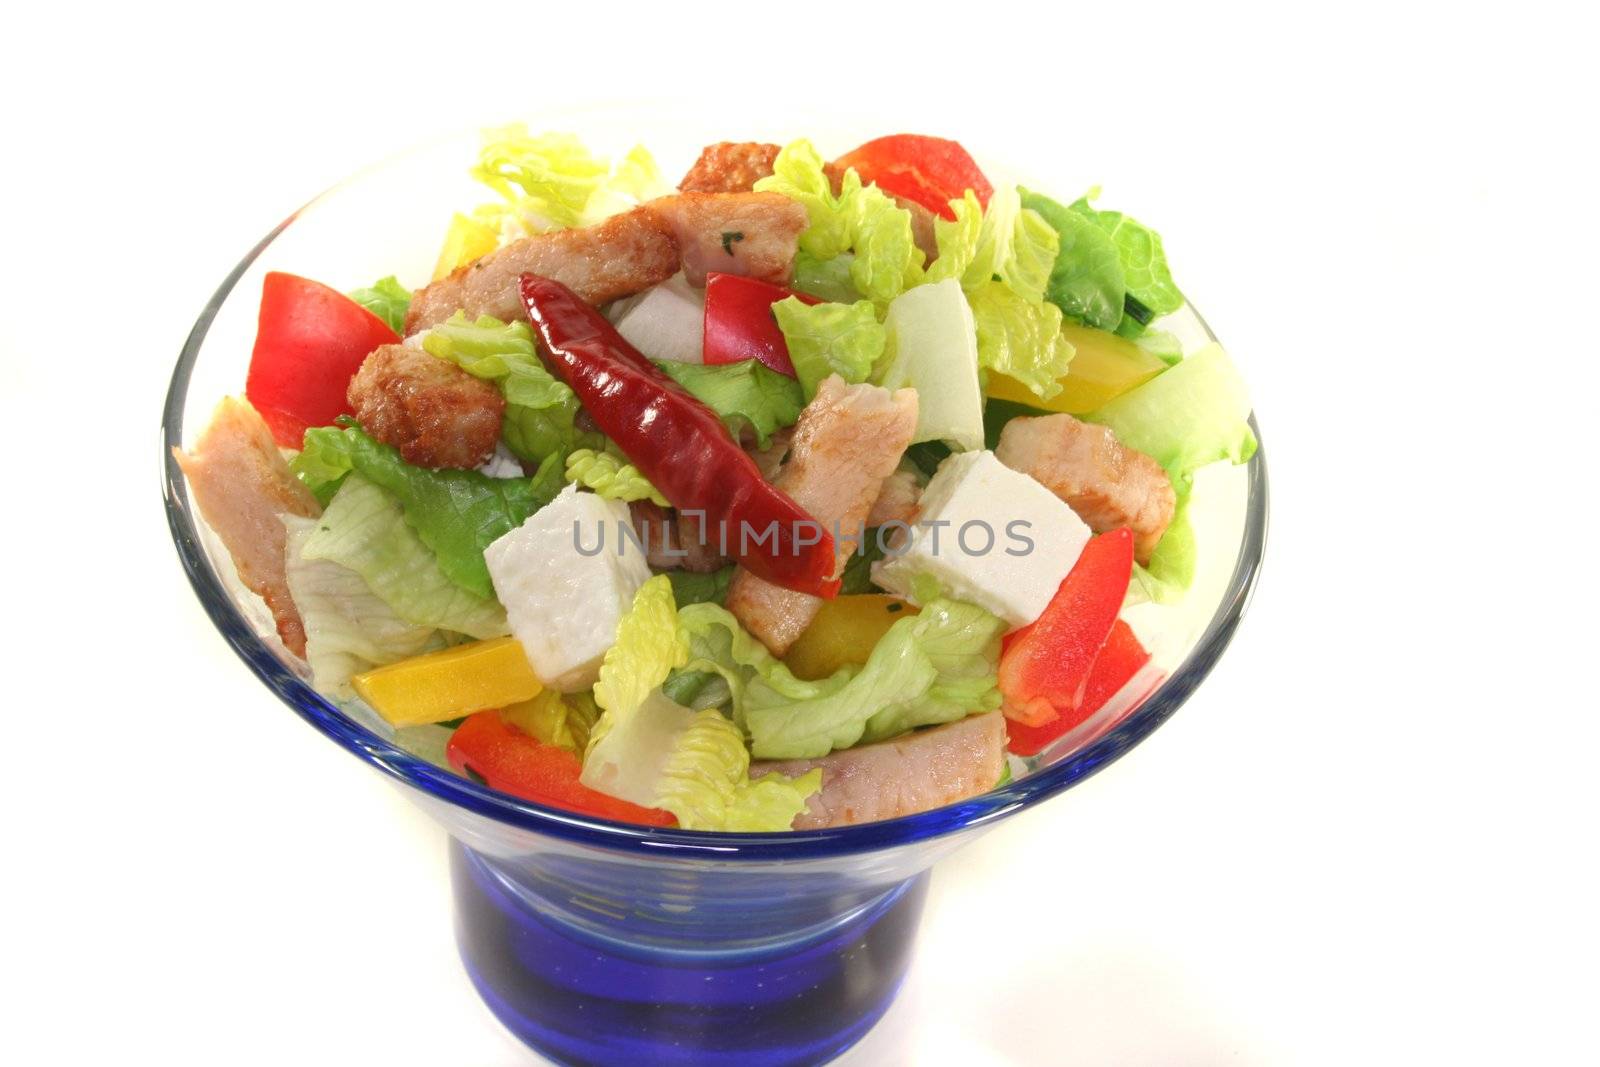 Mixed salad with turkey strips by discovery